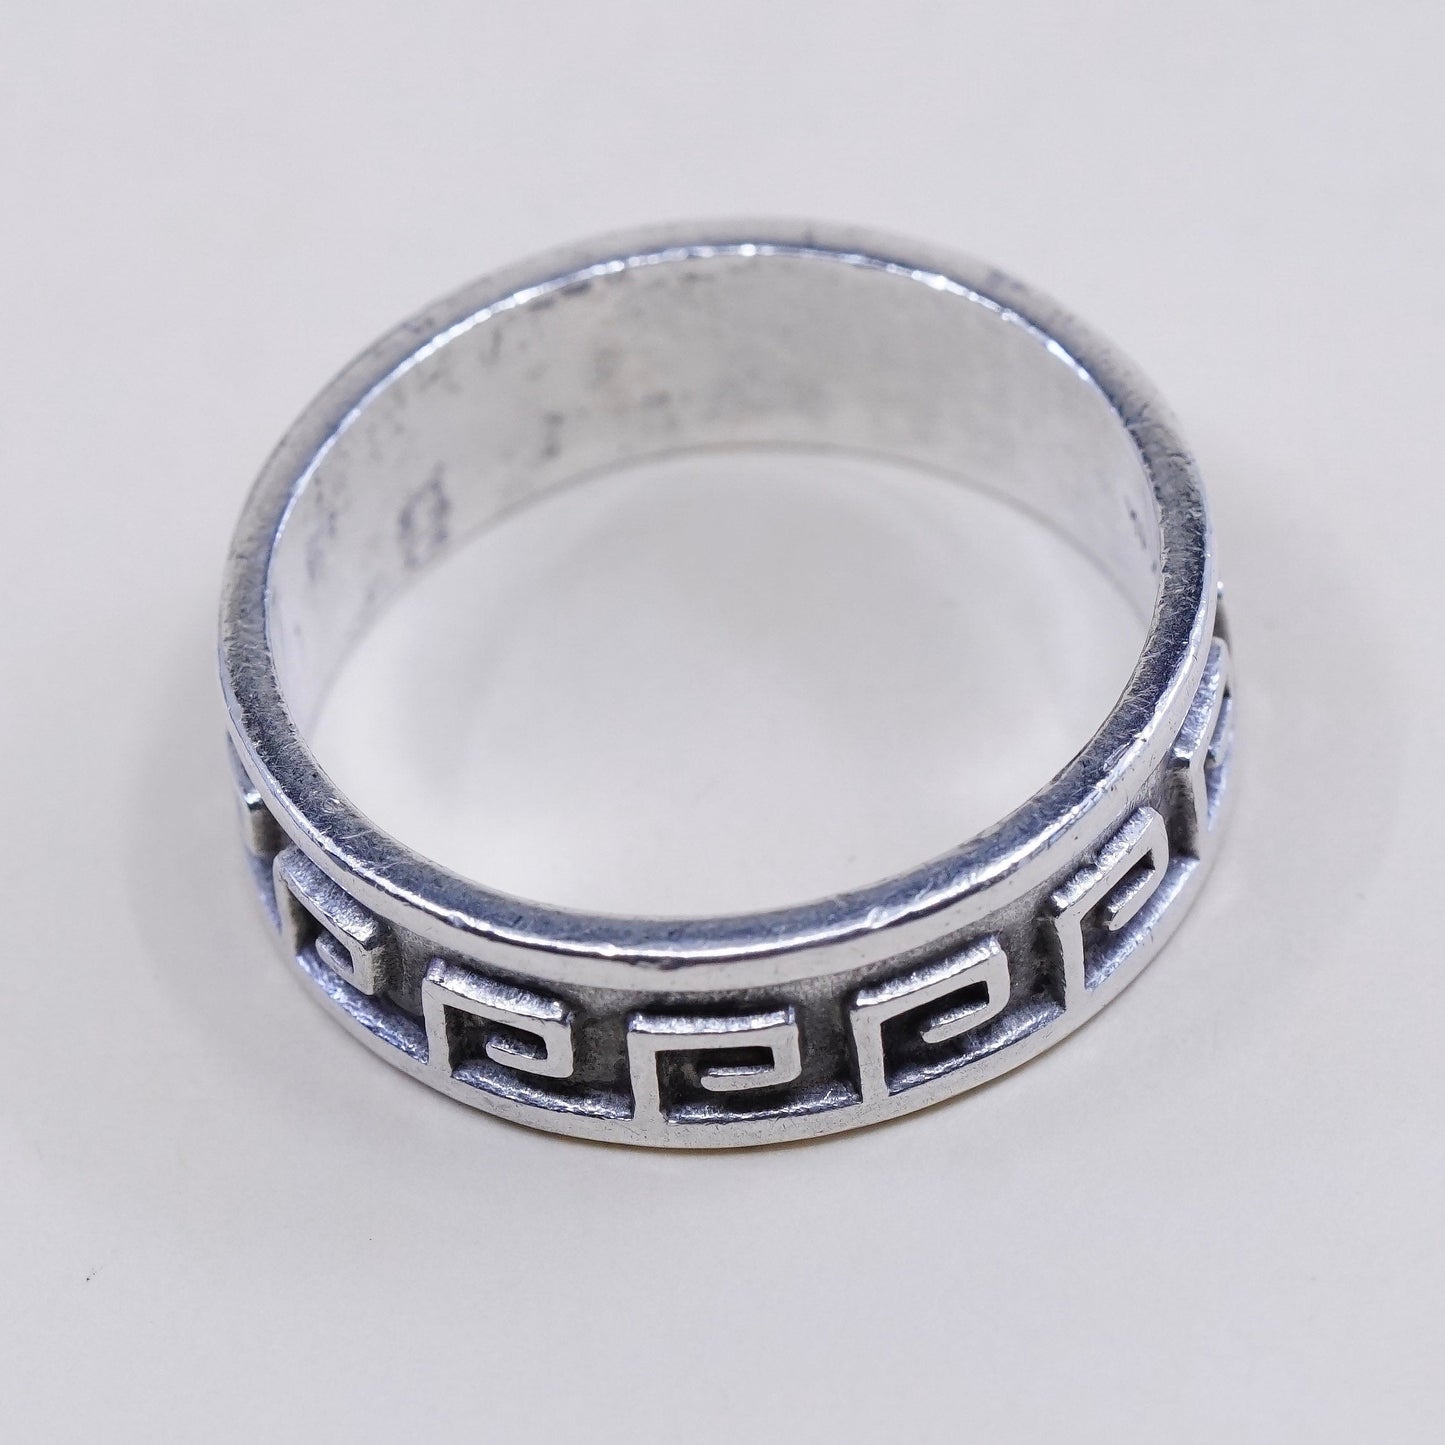 Size 12, vintage Sterling silver handmade ring, mexico Mens 925 greek key band